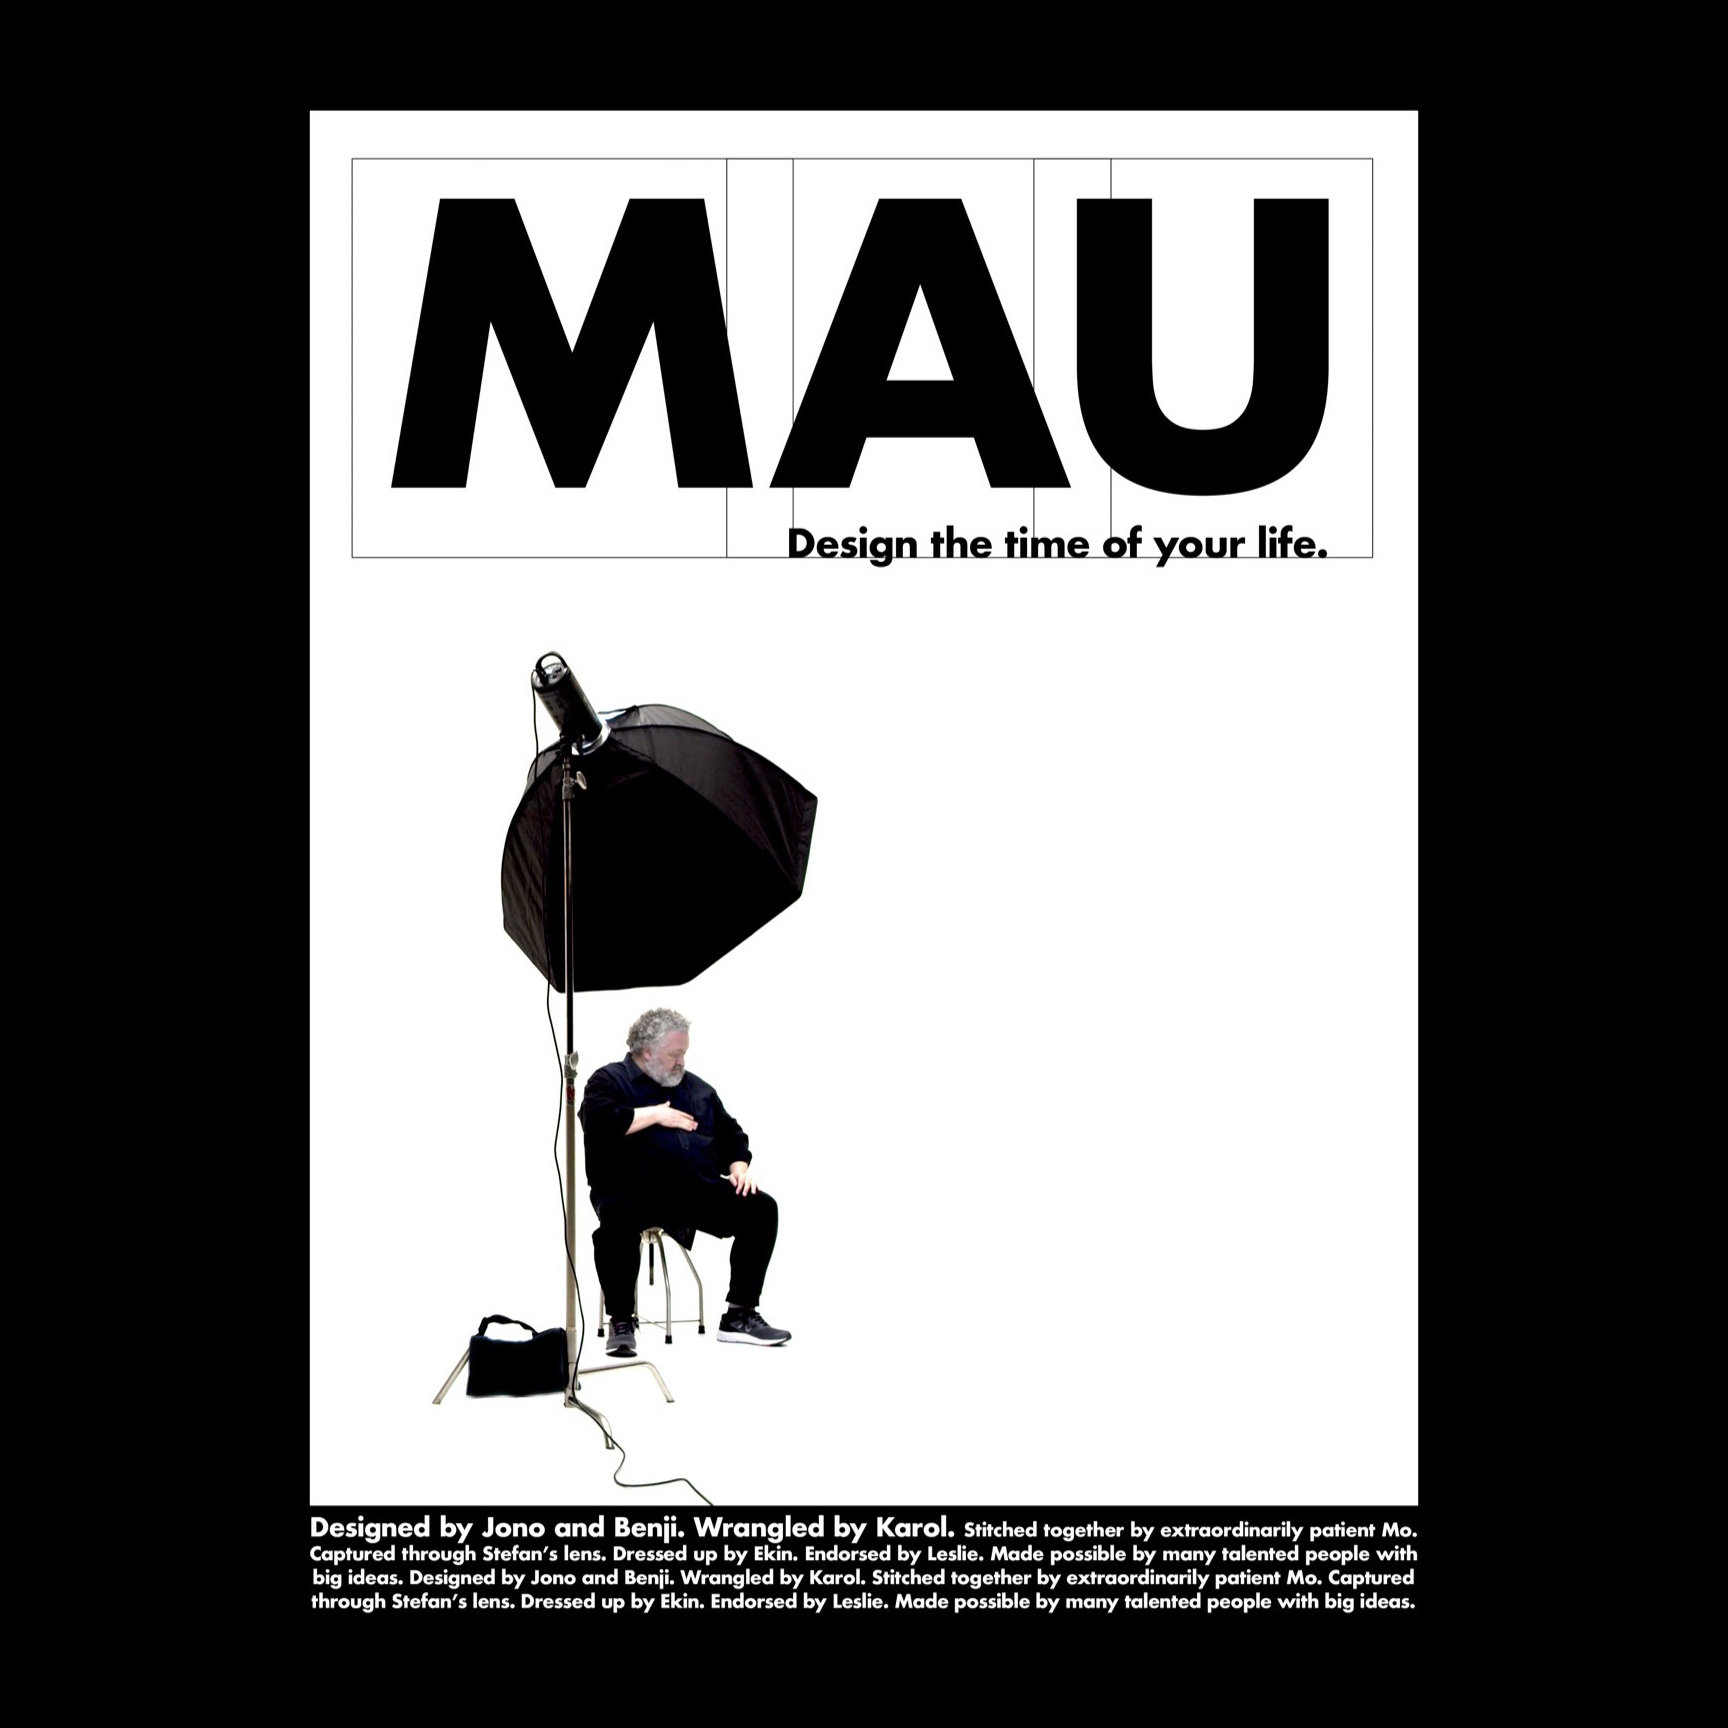 Poster for Bruce Mau's Film Screening - Mau (Design the Time of Your Life